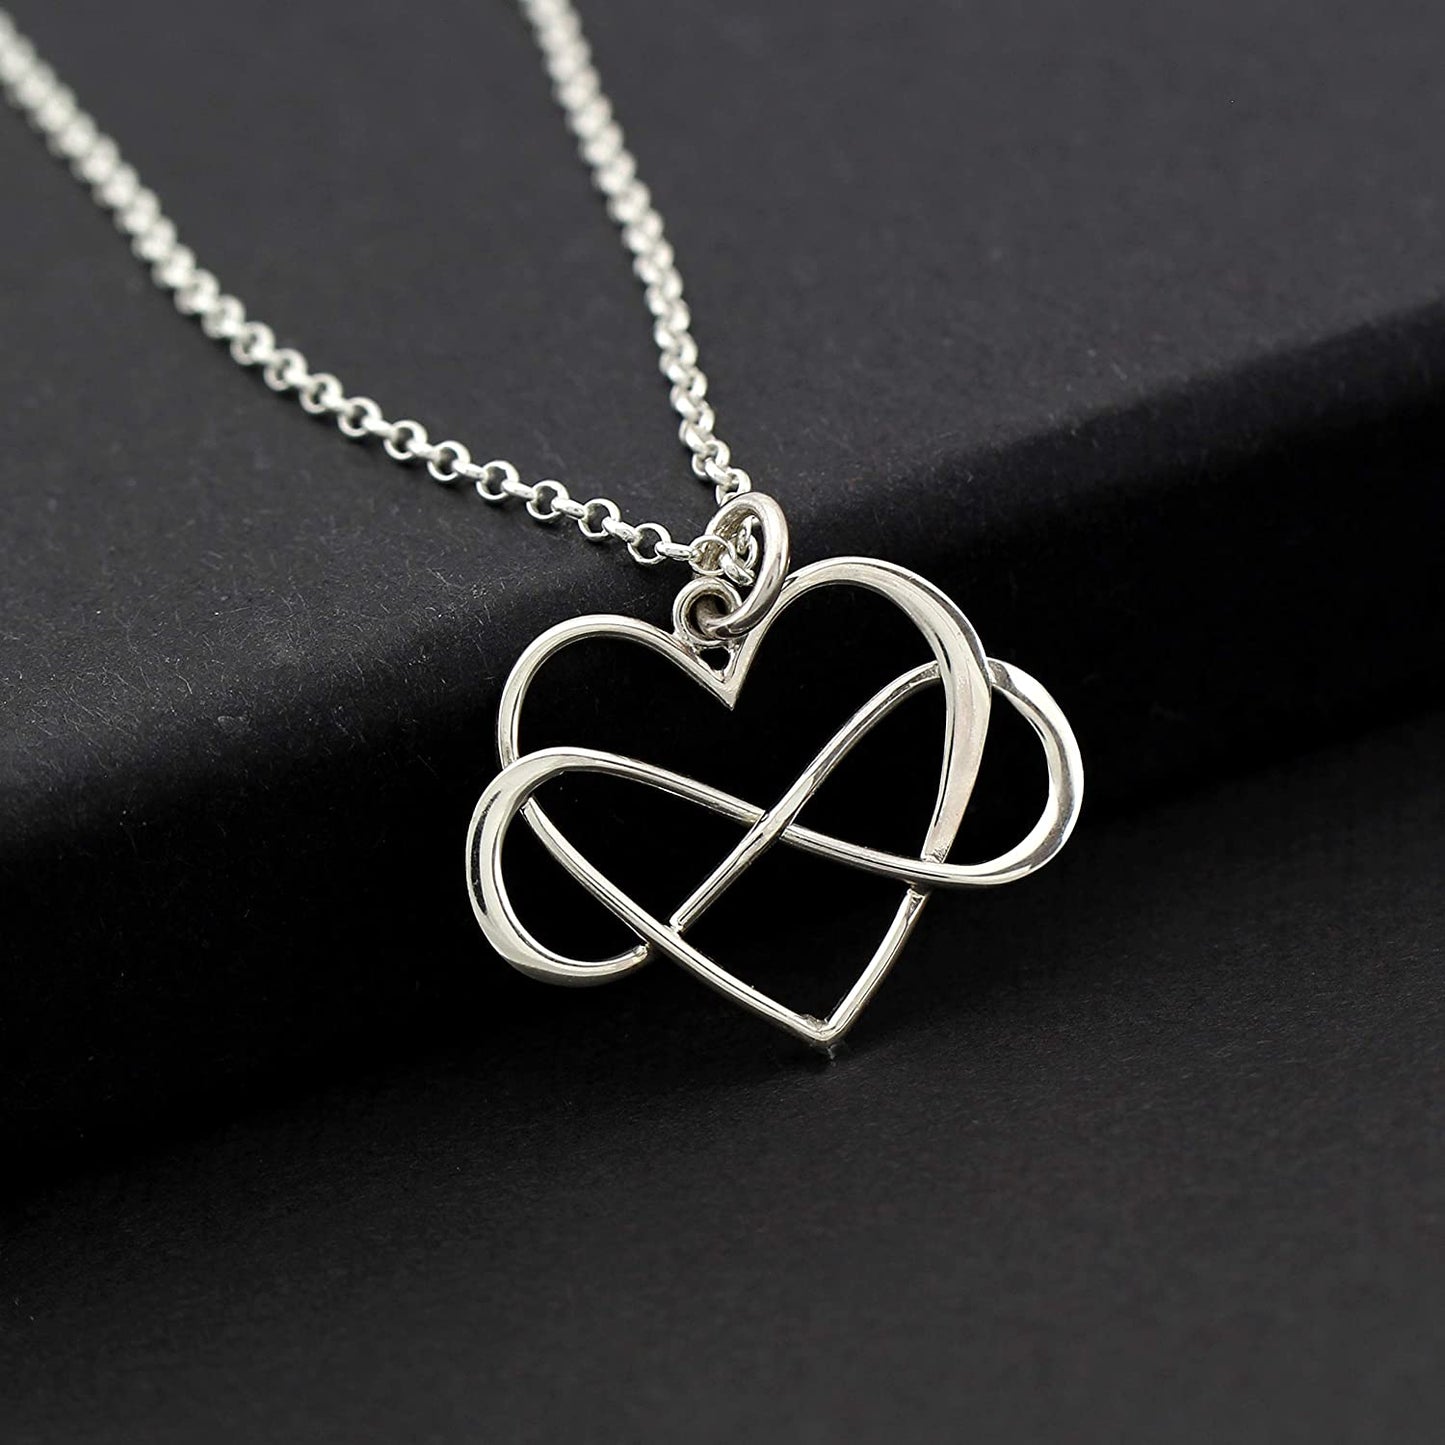 Everyday you Change the World • Silver • Heart with Infinity Necklace • Love Gratitude Appreciation • Inspirational Jewelry